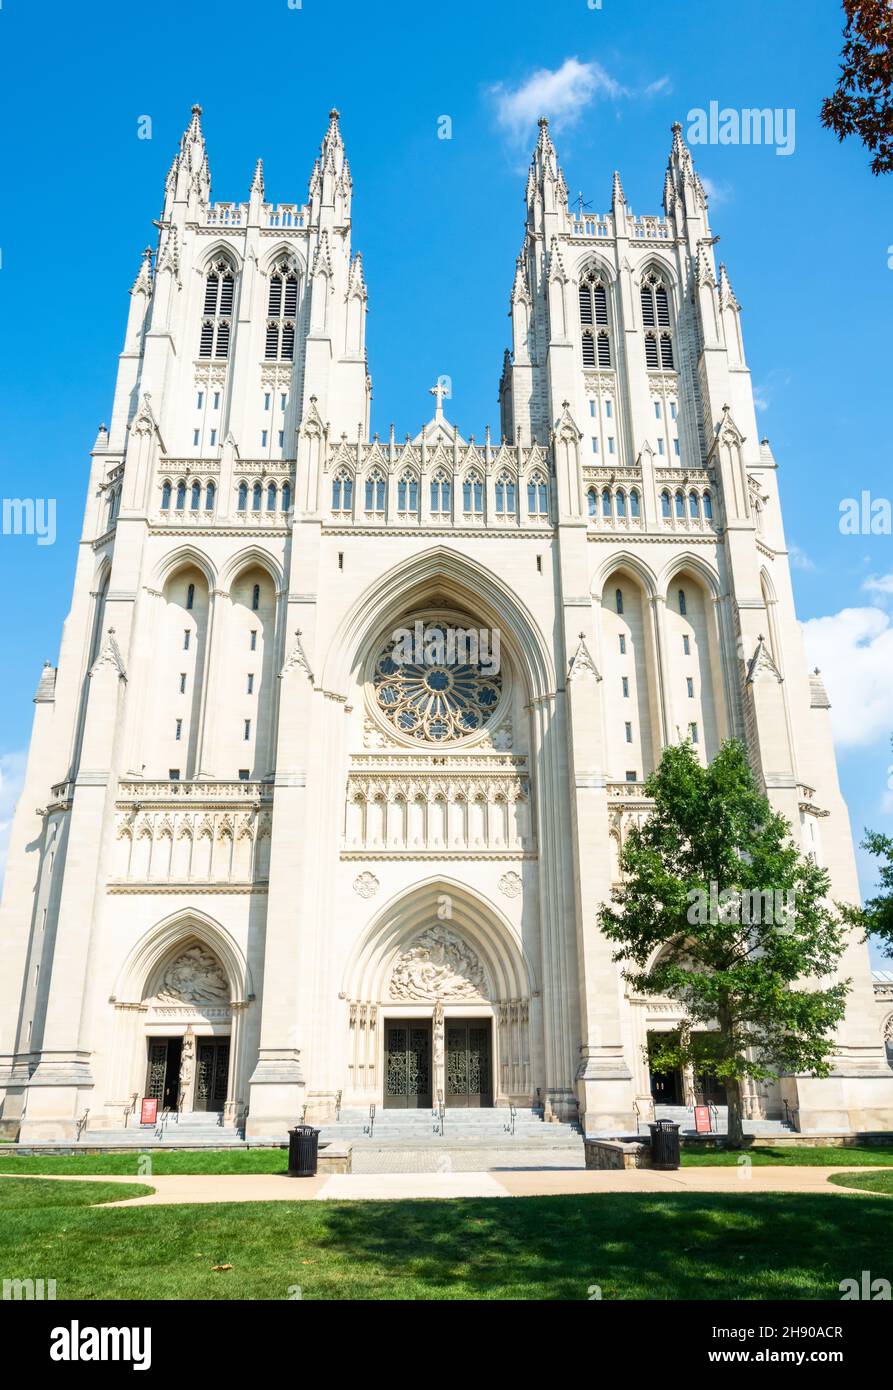 Washington D.C., United States of America – September 7, 2016. Washington National Cathedral (the Cathedral Church of Saint Peter and Saint Paul in th Stock Photo